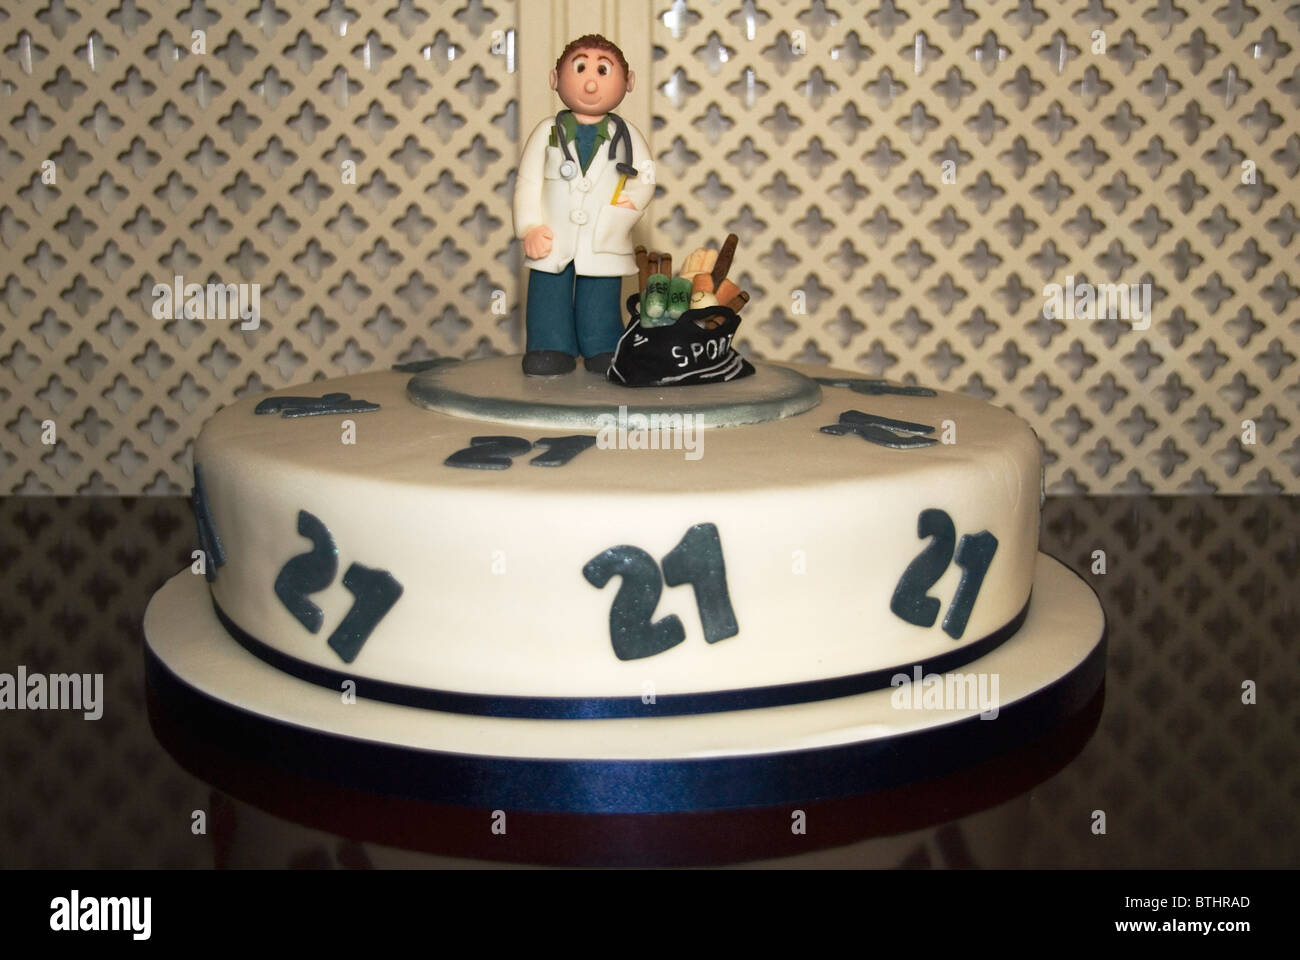 A 21st birthday cake portraying a sports enthusiastic doctor Stock Photo